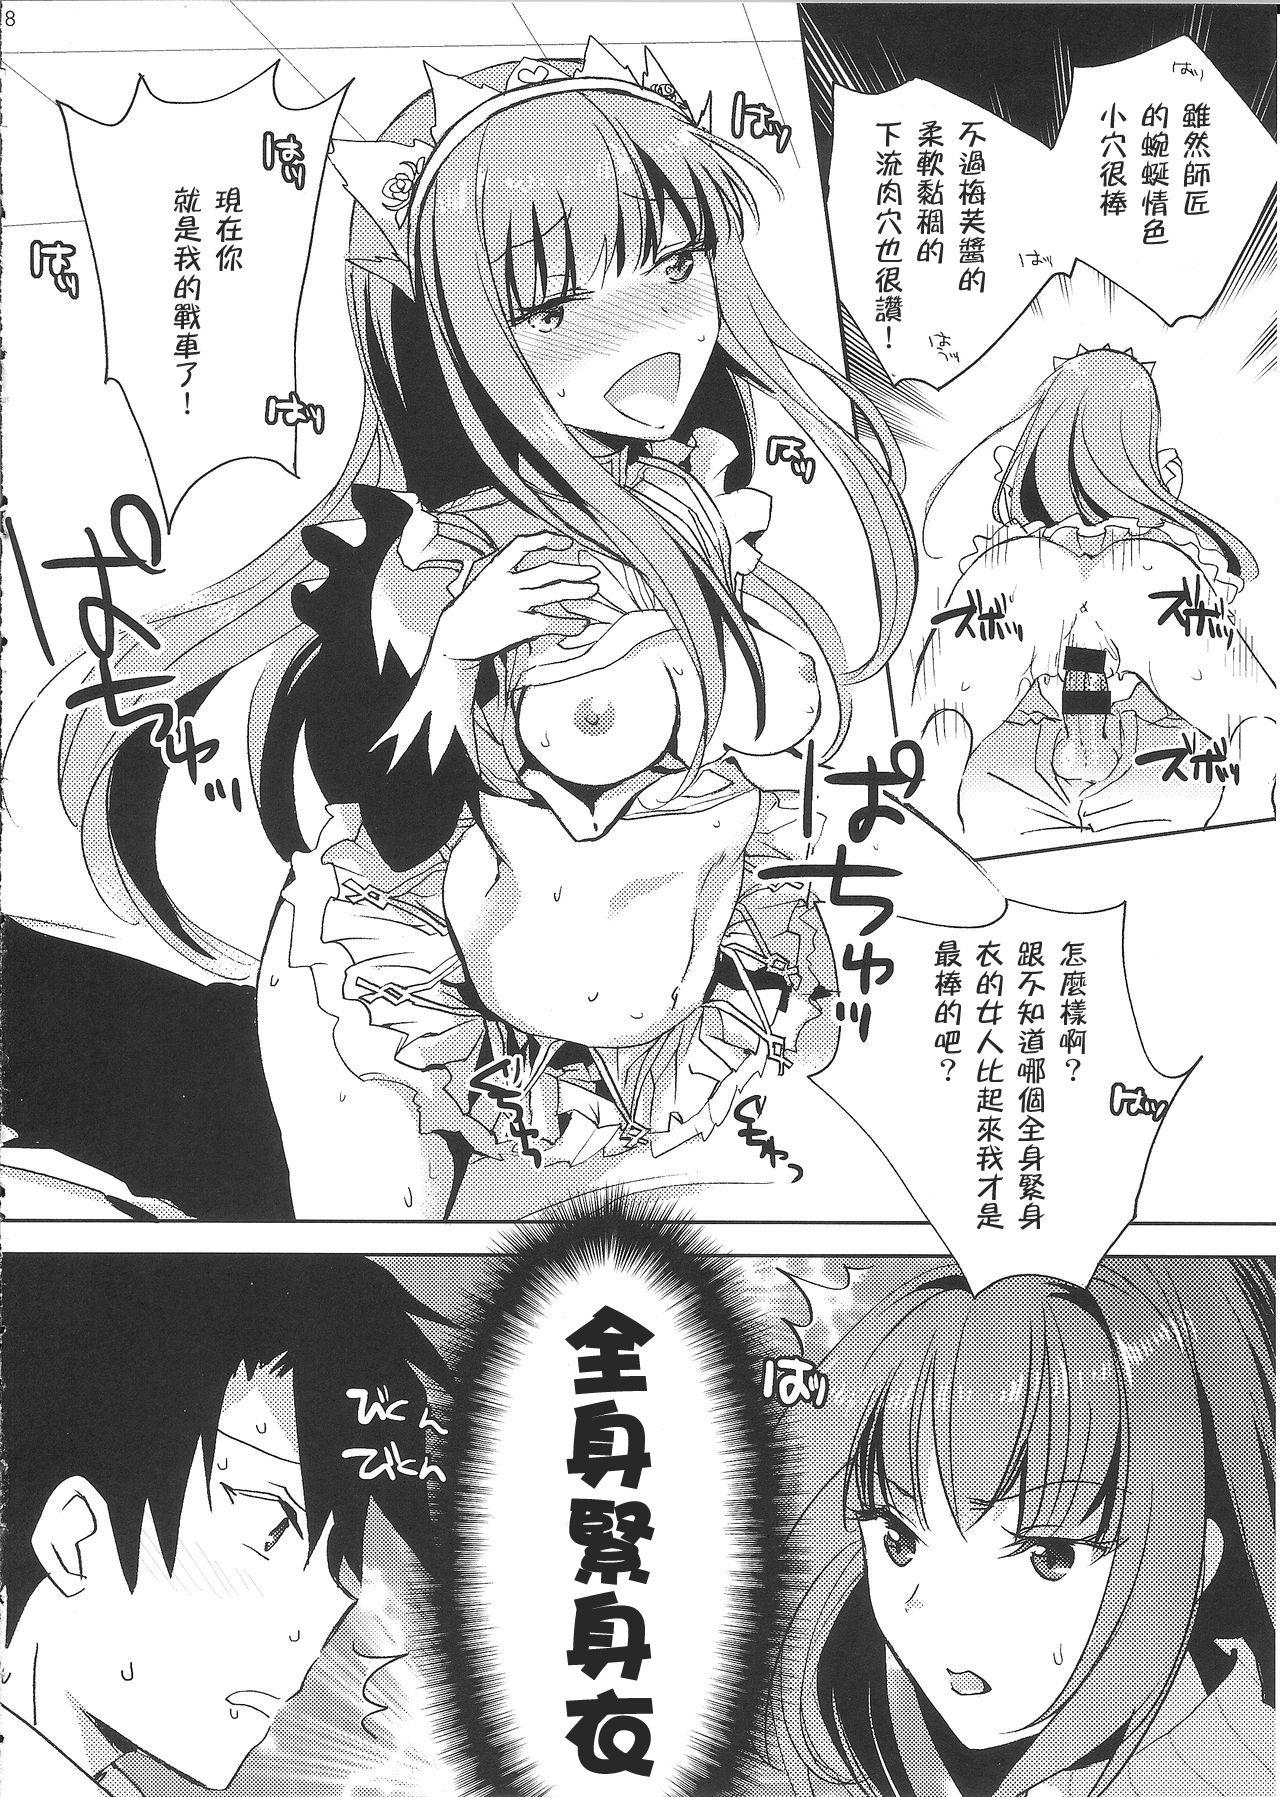 Eating Pussy BLACK EDITION 2 - Fate grand order Creamy - Page 6